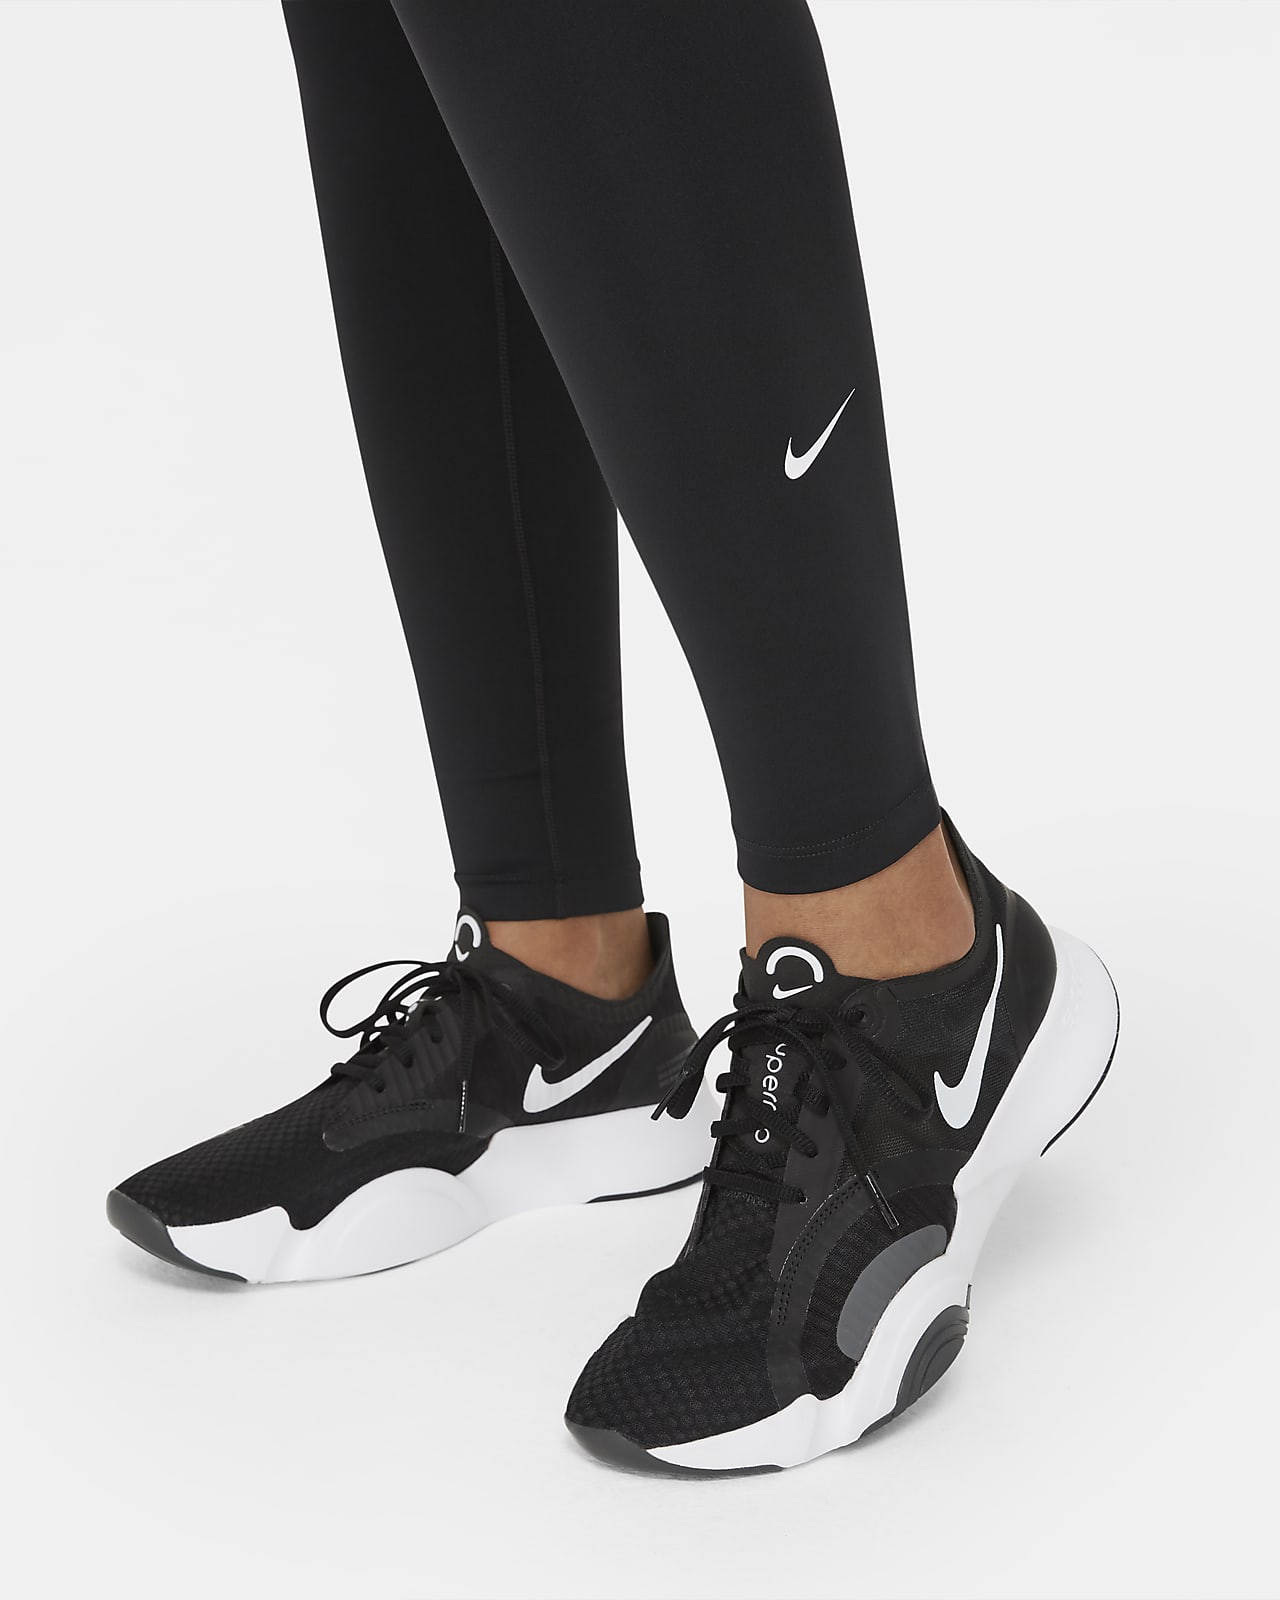 Nike Women's Power Tights Small Gym Running Cross fit Atmosphere